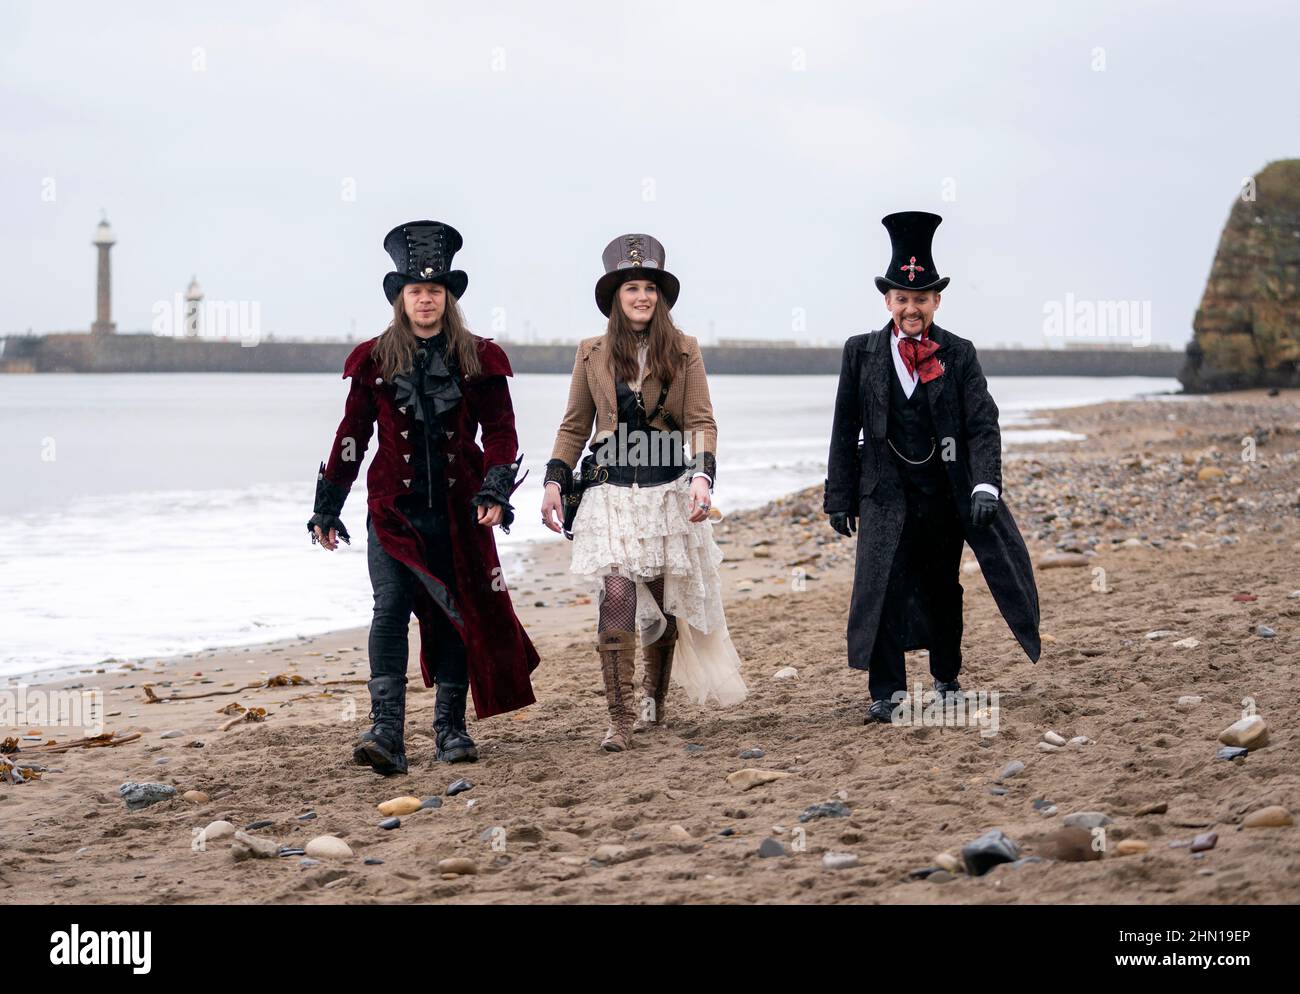 People in costume attend the Whitby Steampunk Weekend in Whitby, Yorkshire. Steampunk is a subgenre of science fiction or Steampunk began as a sub-genre of science fiction and fantasy literature, but has developed in recent years to become a craft and lifestyle movement that commonly features some aspect of steam-powered machinery. Picture date: Sunday February 13, 2022. Stock Photo